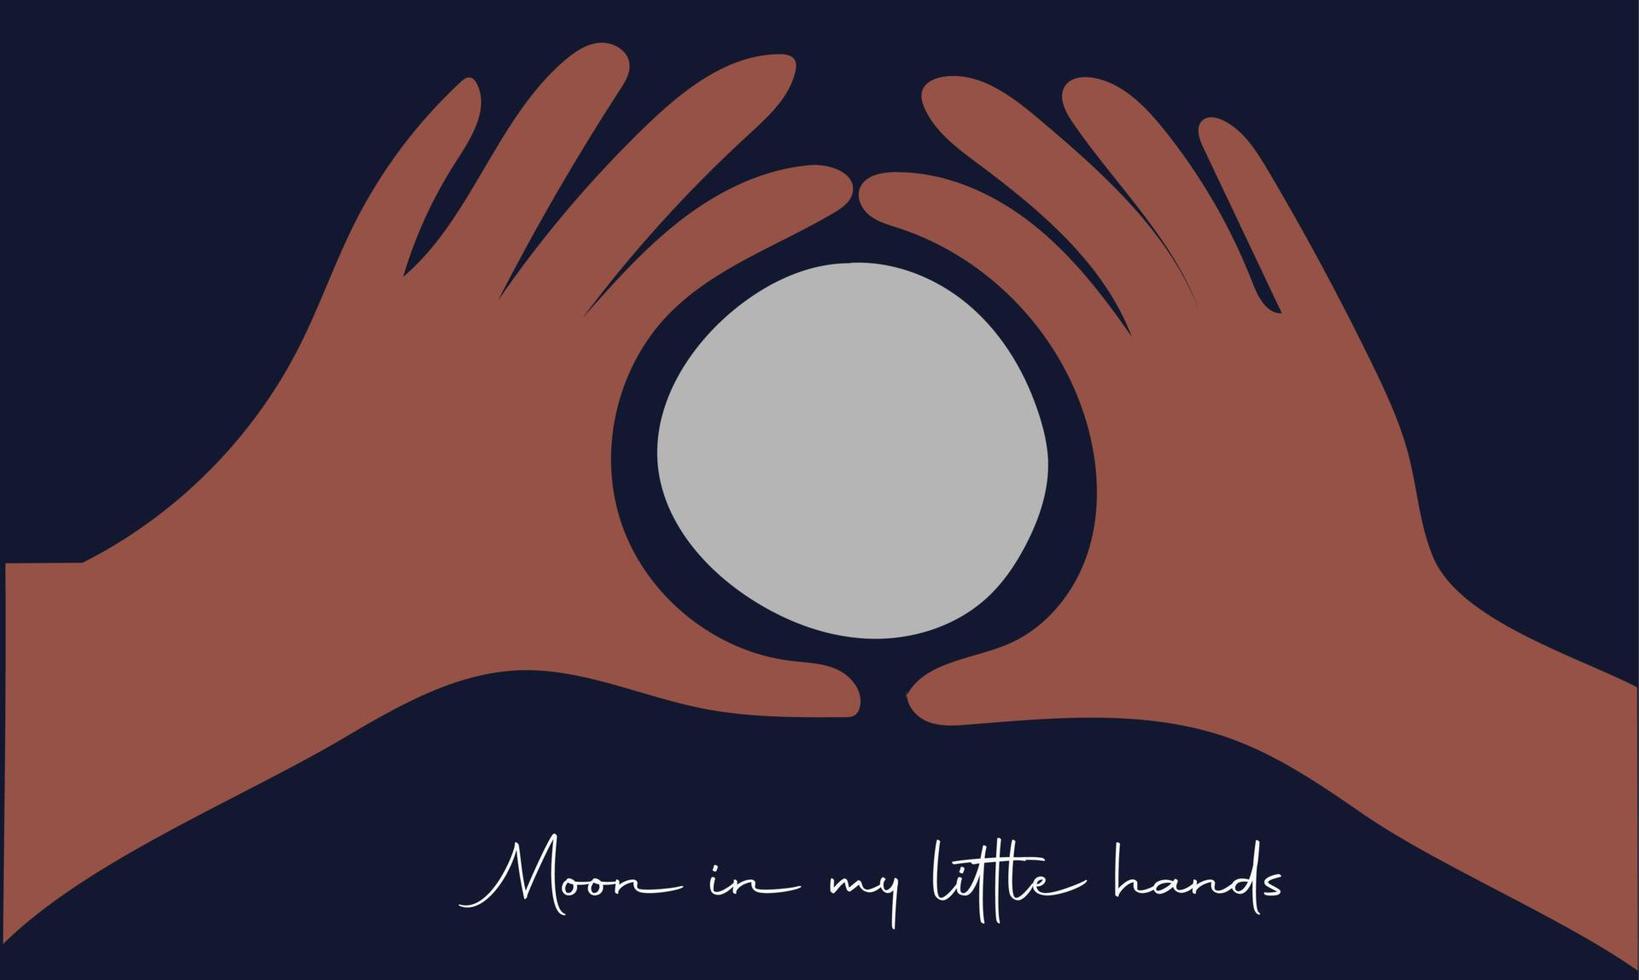 Moon in my little hands. Vector illustration showing hand gestures holding moon. Can be used for story telling, puppet show, stage plays.